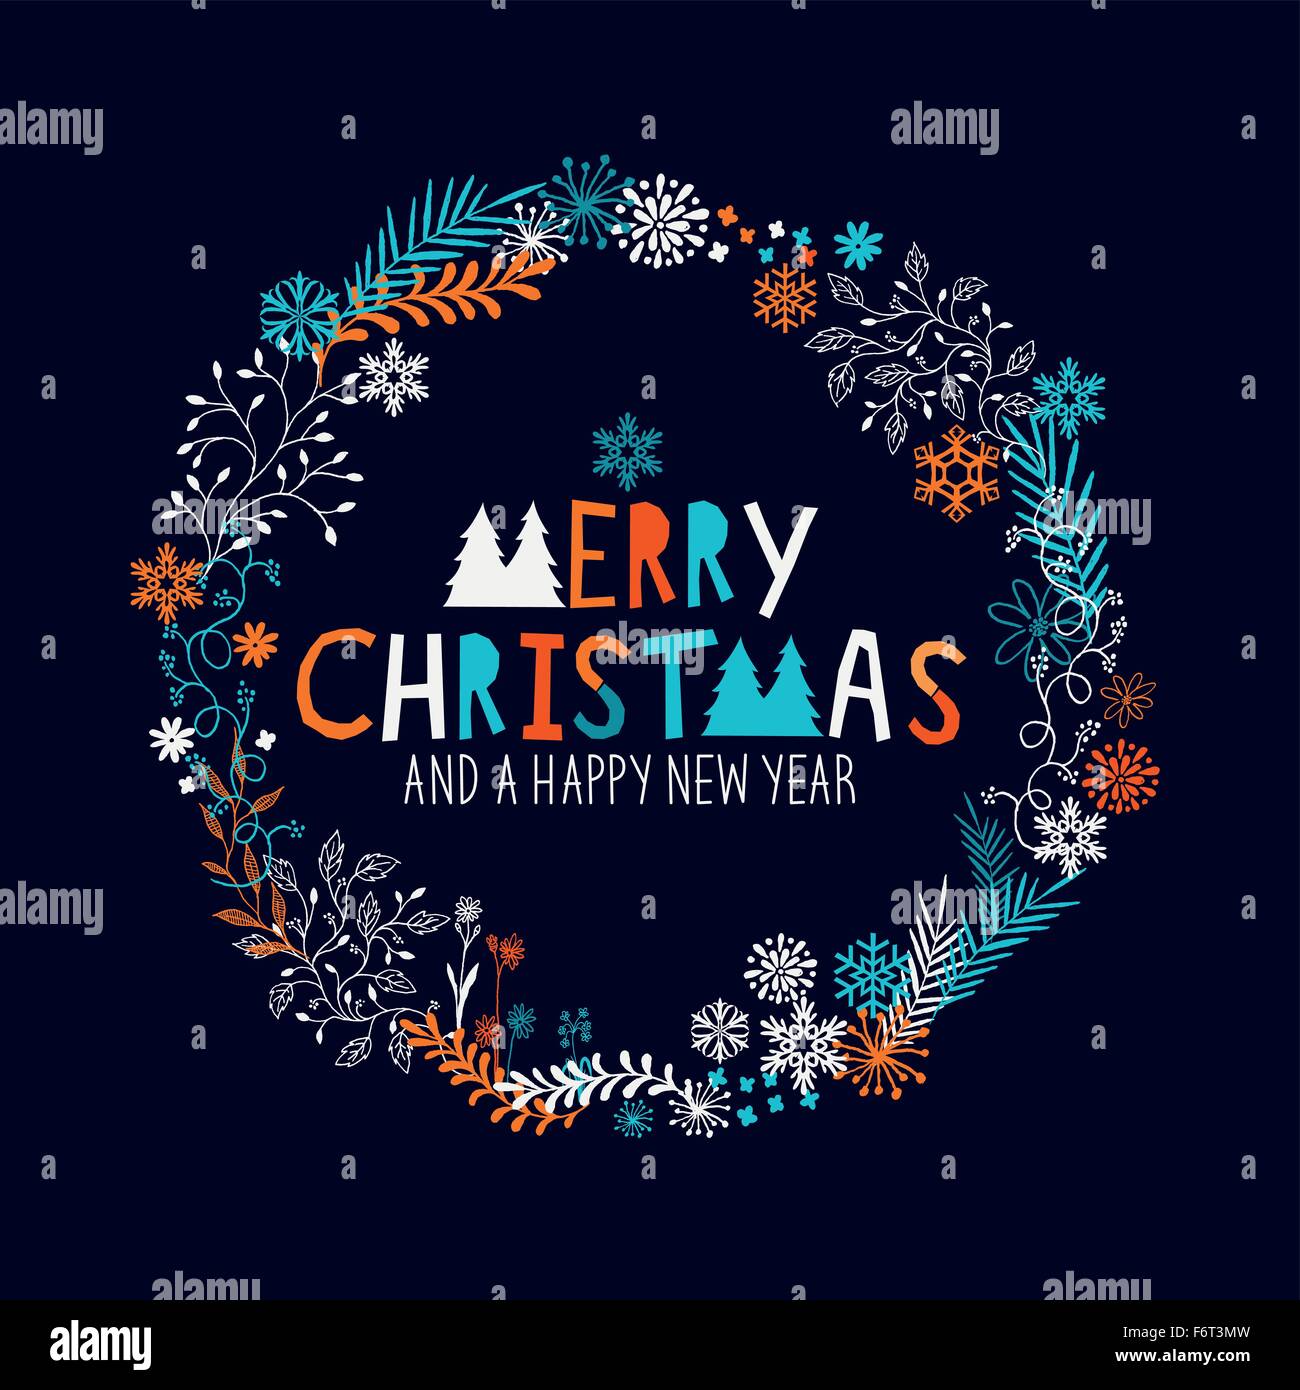 Merry Christmas Wreath with snowflakes and floral patterns. Vector illustration Stock Vector